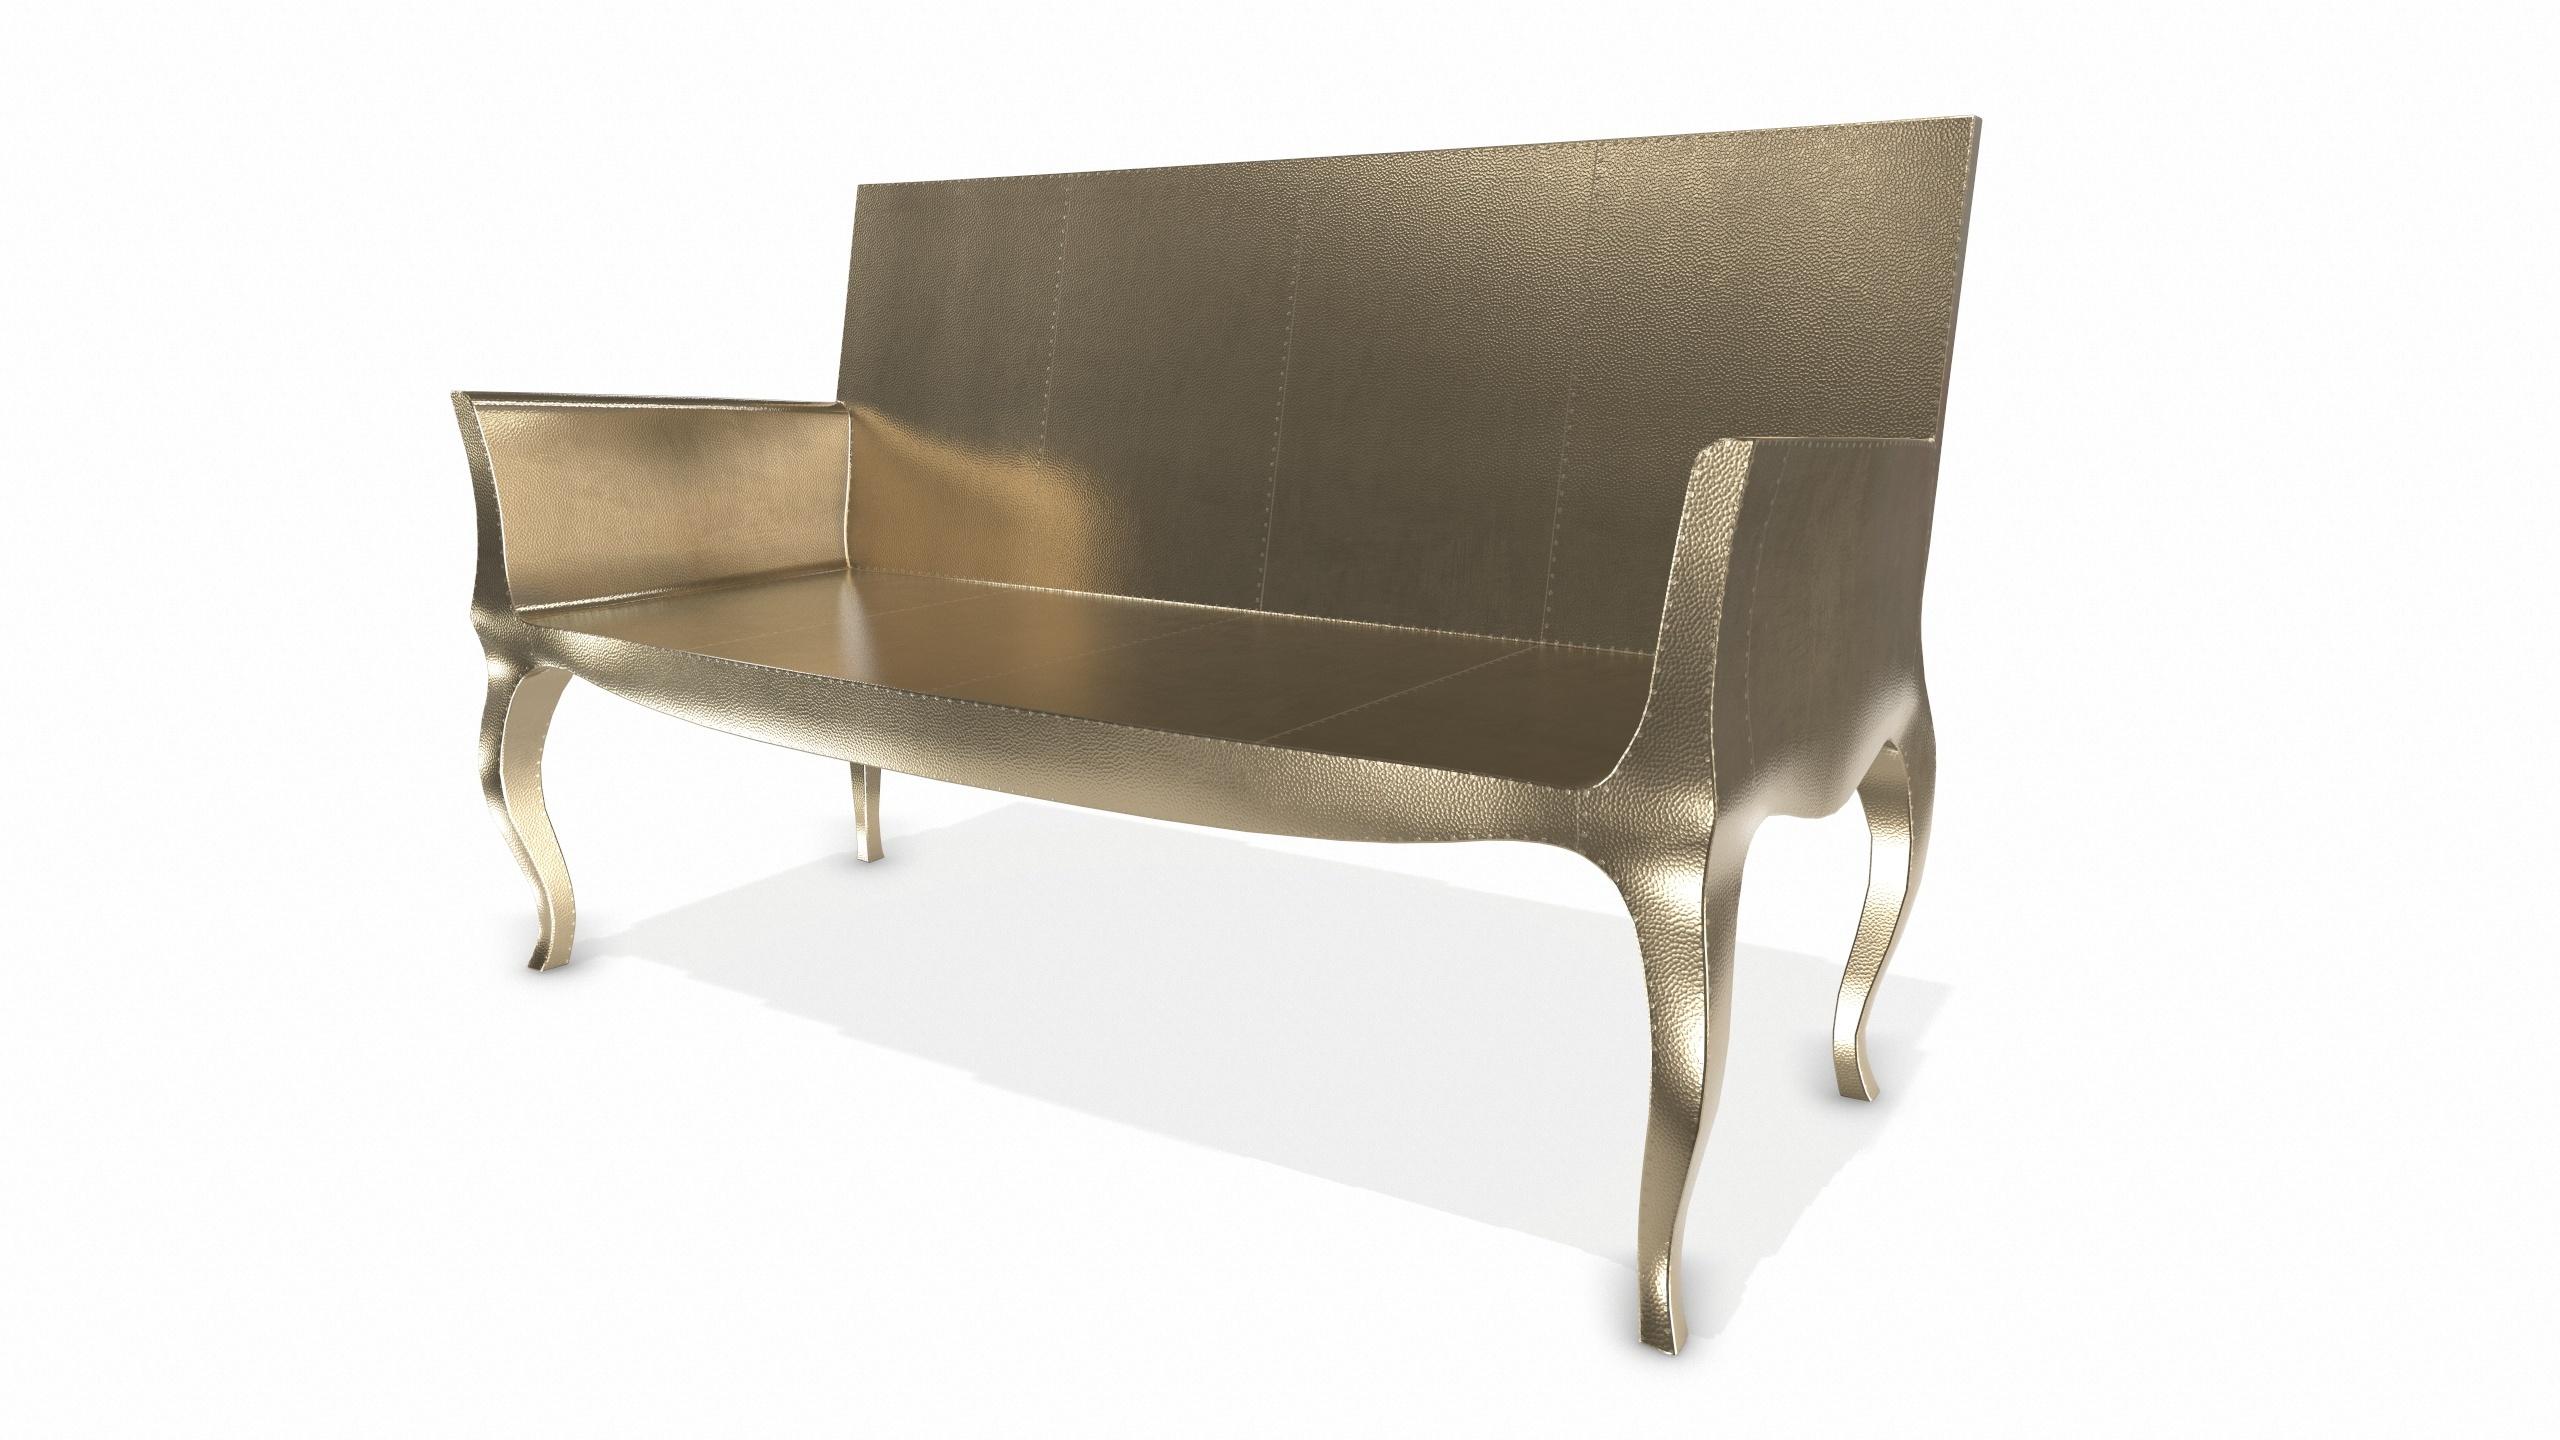 American Louise Settee Art Deco Lounge Chairs in Mid. Hammered Brass by Paul Mathieu For Sale